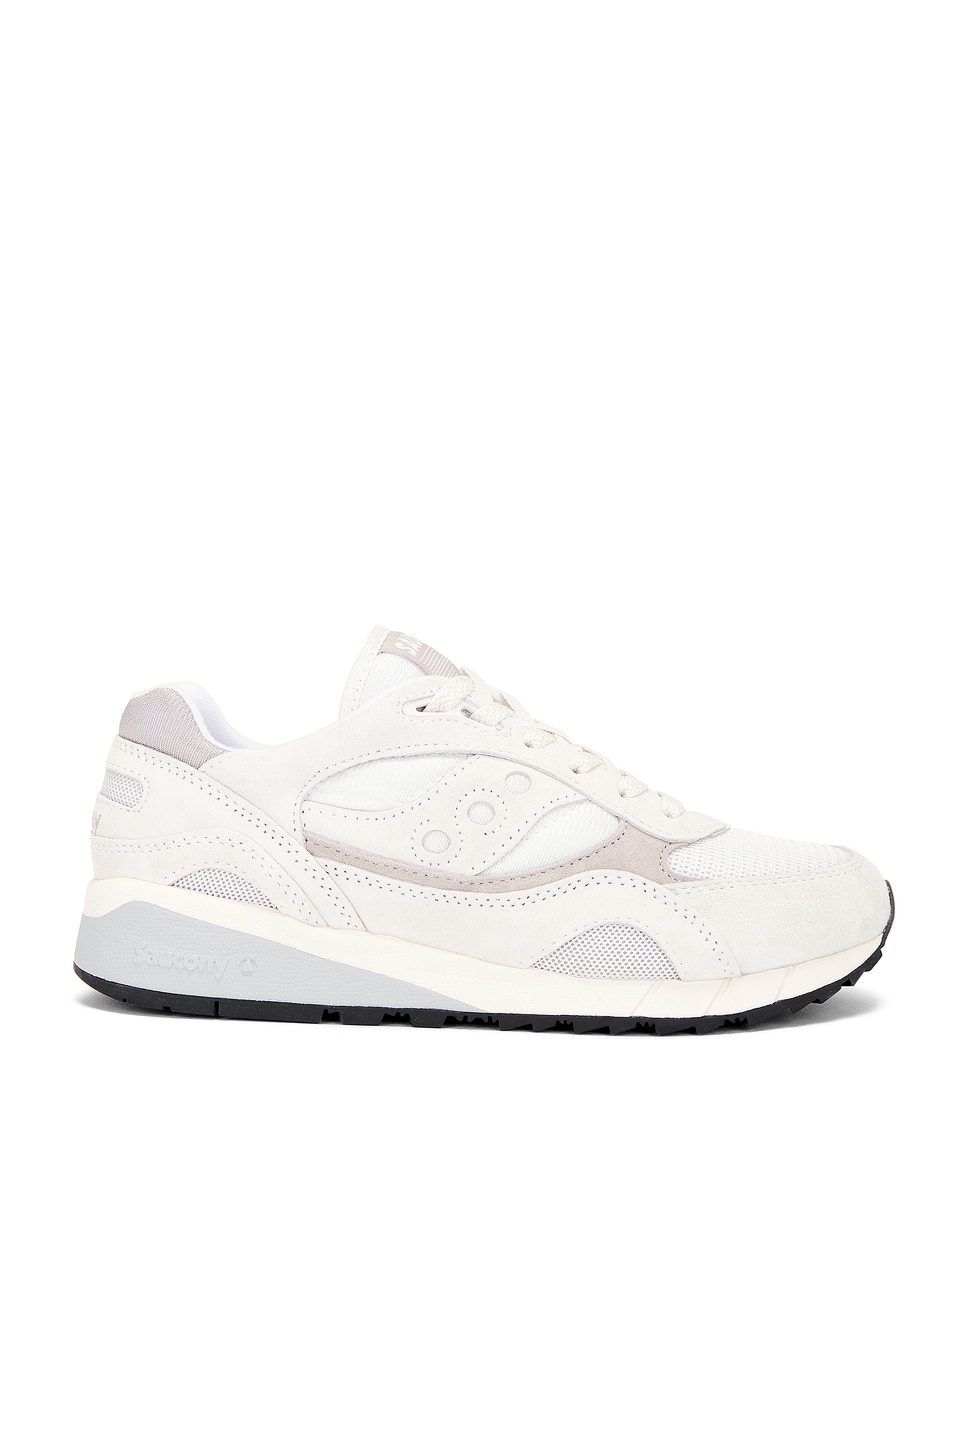 Image 1 of Saucony Shadow 6000 in White & Grey